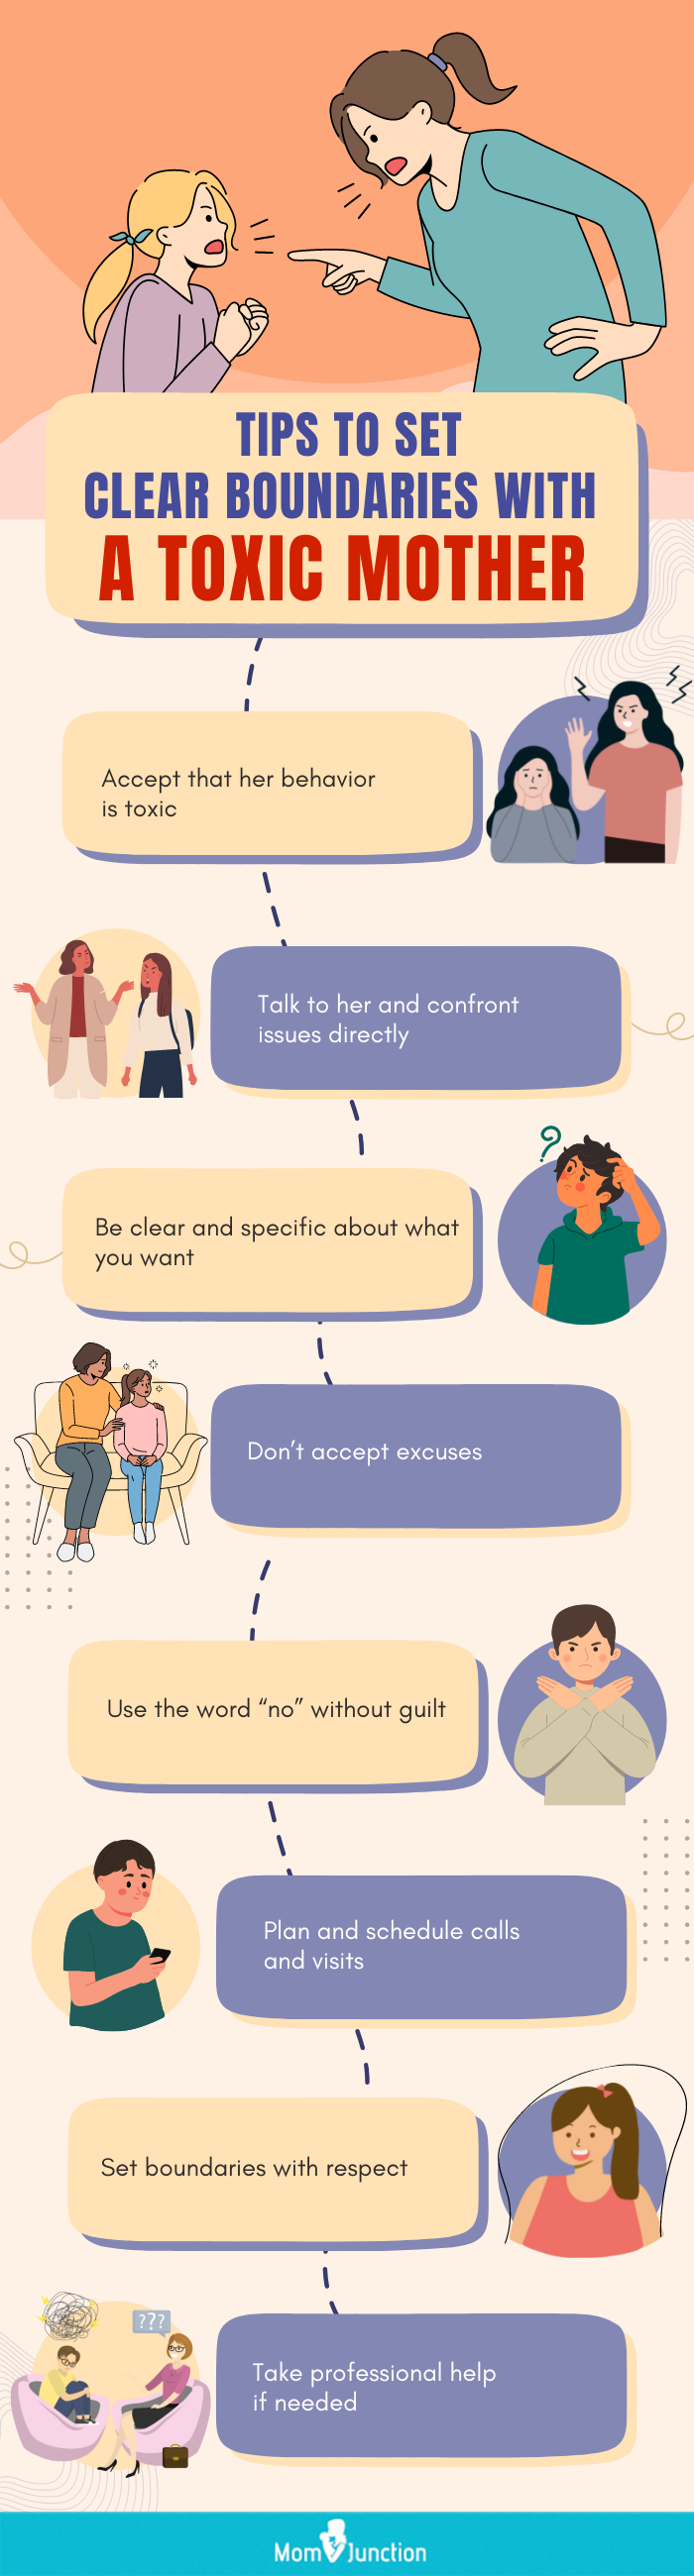 tips to set clear boundaries with a toxic mother (infographic)